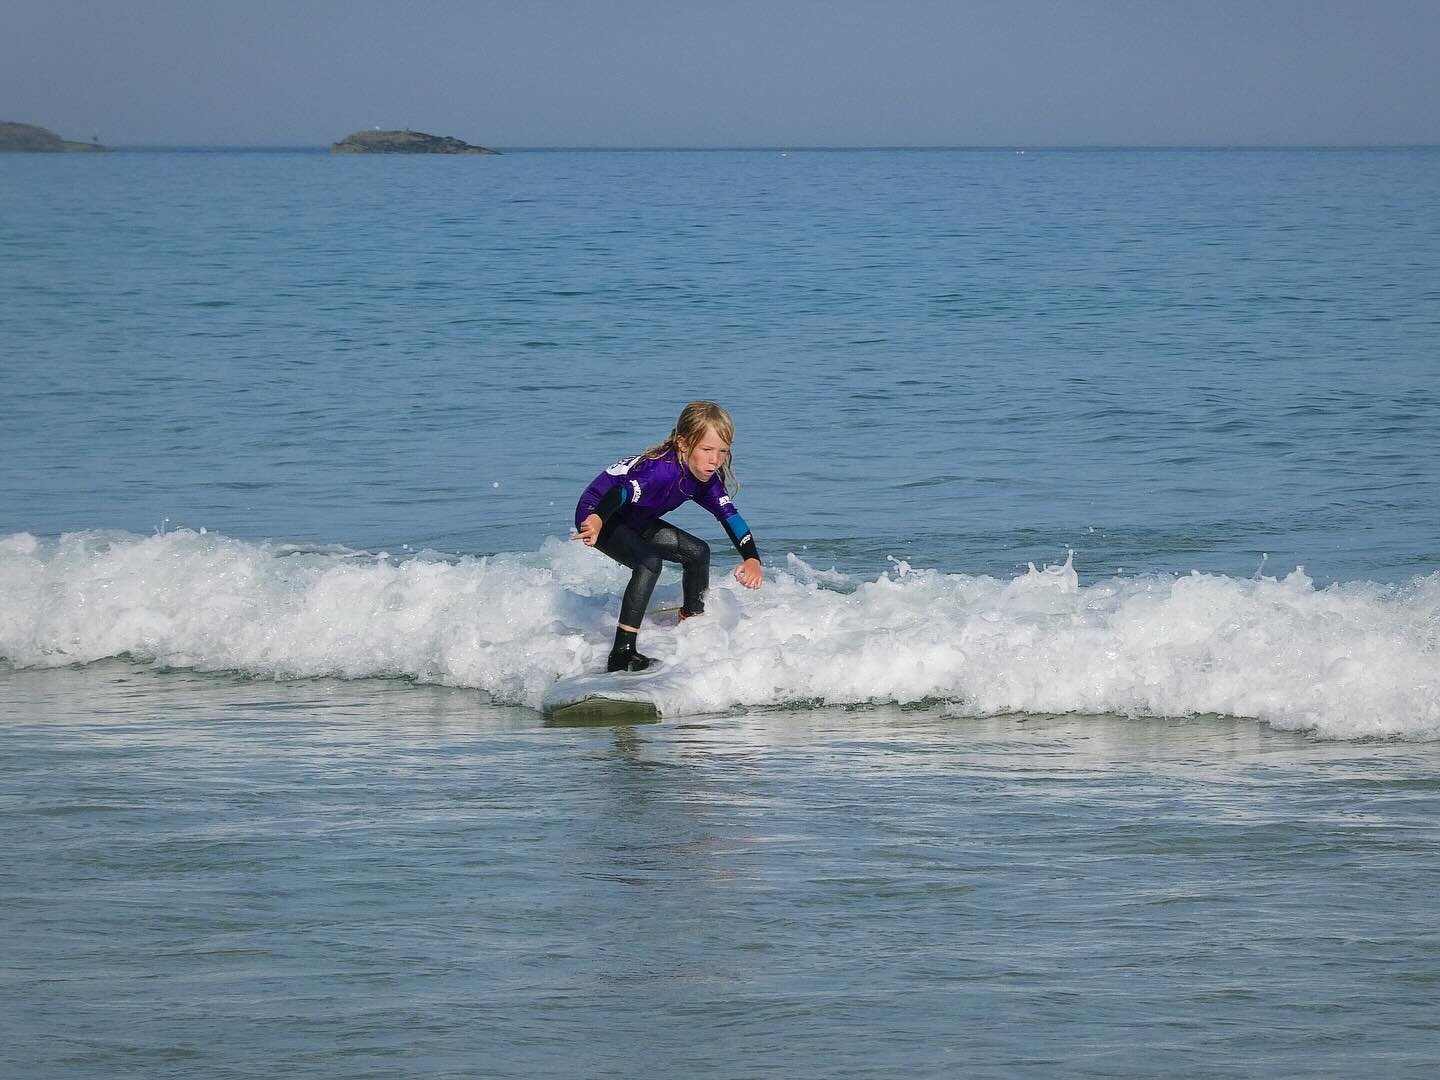 ⚡️Saturday Surf Club ⚡️

Our legendary local surf club is getting ready to roll. This years first session will be Saturday 18th May. The club offers heavily subsidised weekly Surf sessions for children aged 4 - 16 years who live in the West Cornwall 